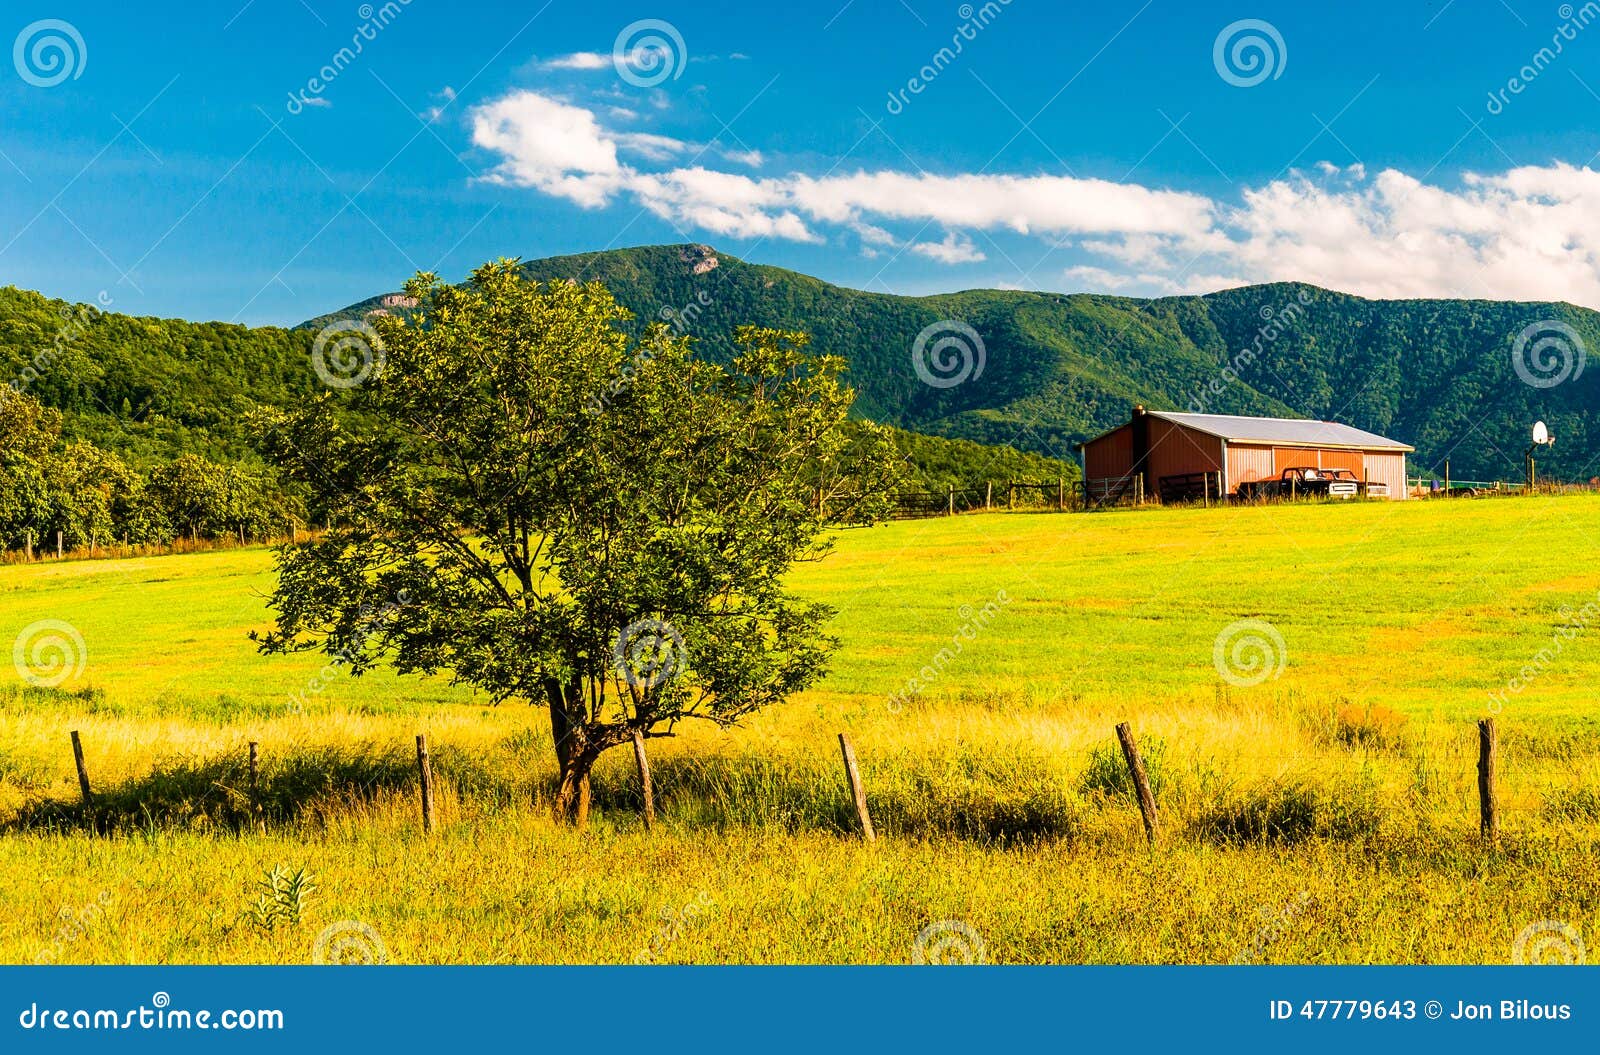 barn, tree and view of the appalachians in the shenandoah valley